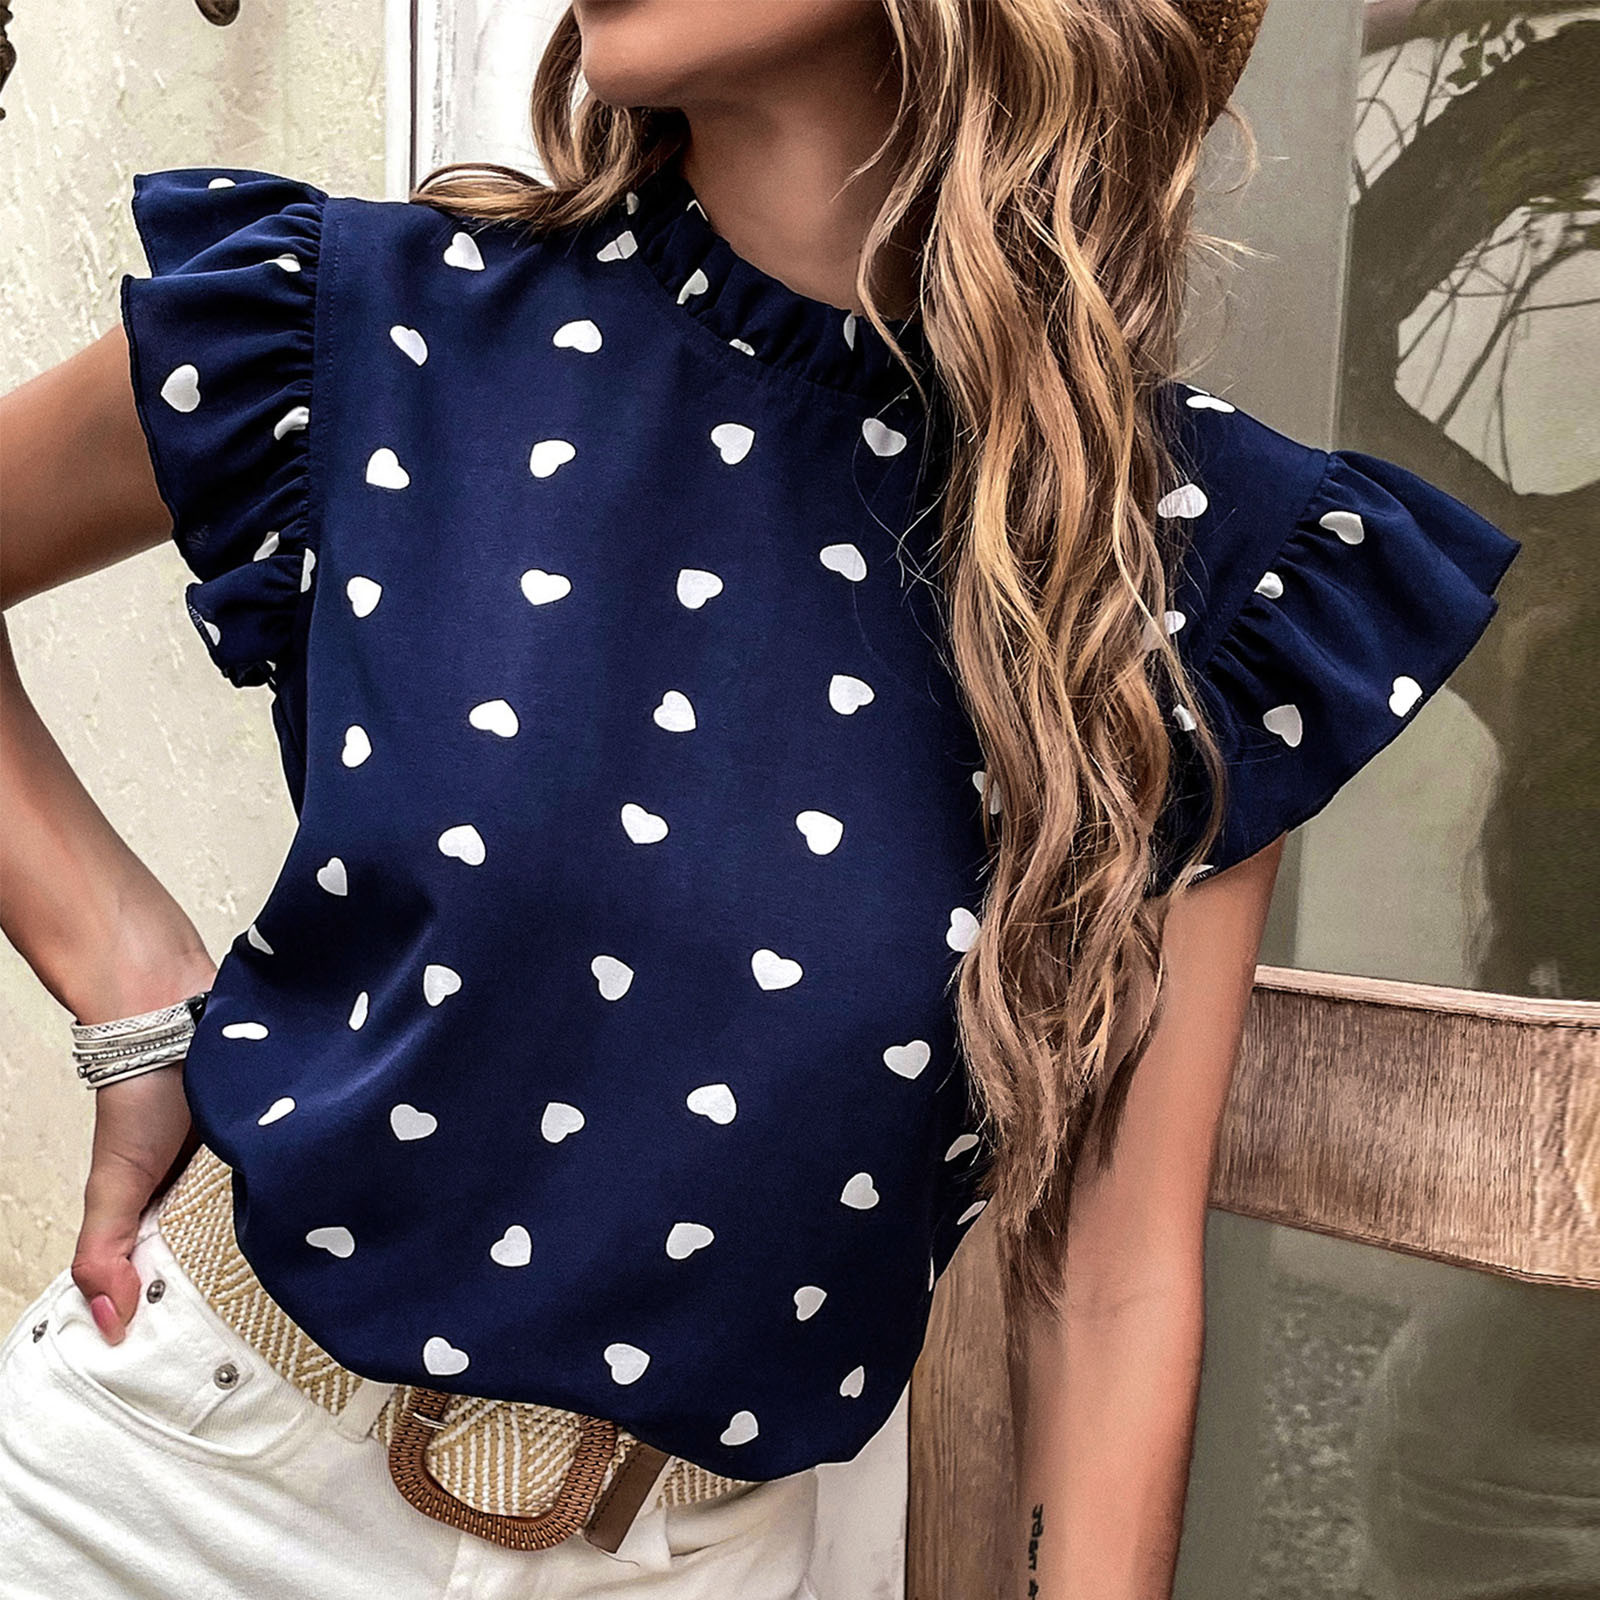 TAIAOJING Tshirt Women Summer Casual Short Sleeve Summer Pleated Polka Dot Round Neck Loose Top Fall T-Shirt - image 4 of 9